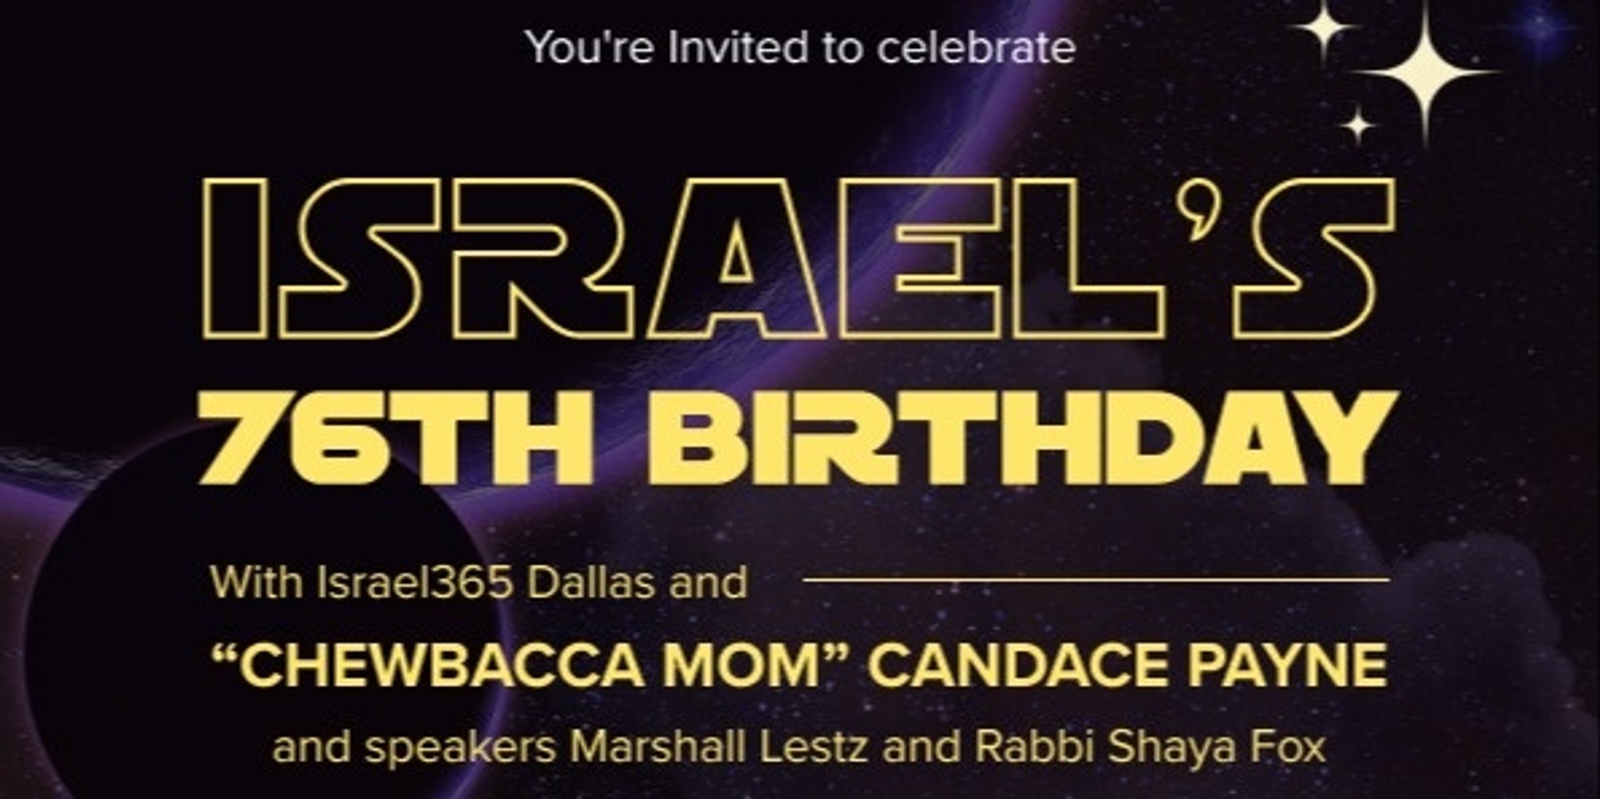 Banner image for Celebrate Israel's 76th Birthday with 'Chewbacca Mom' Candace Payne!